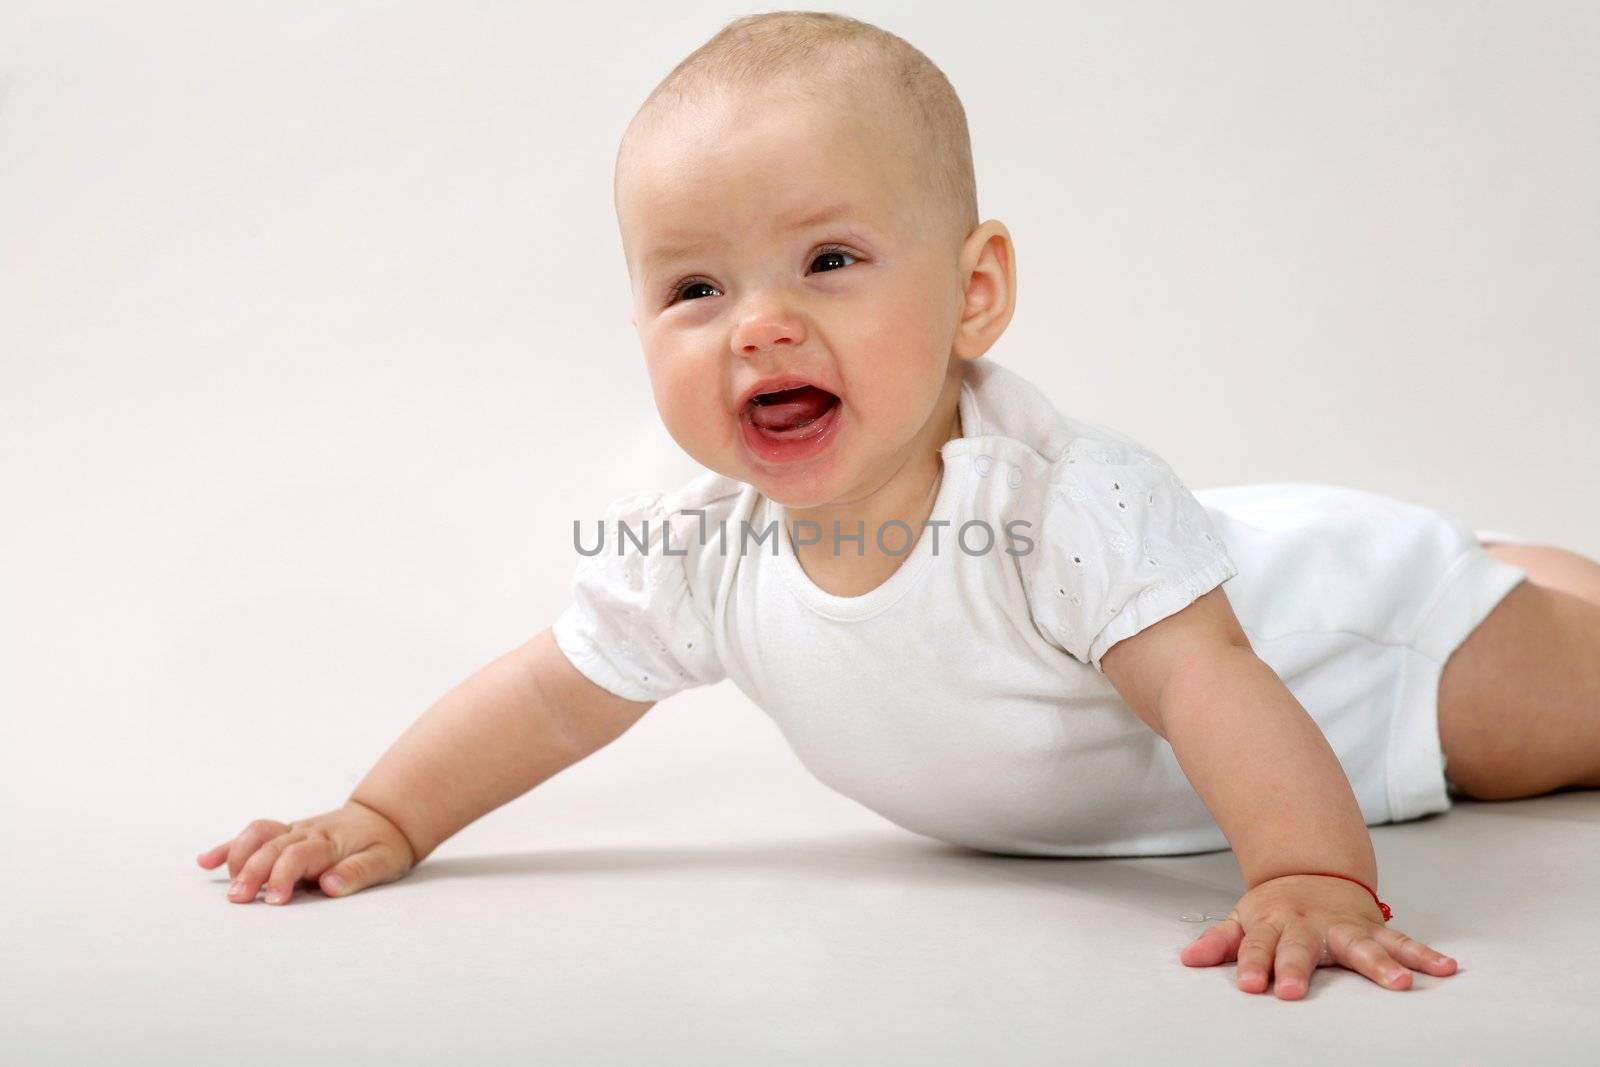 An image of a little baby crawning in studio